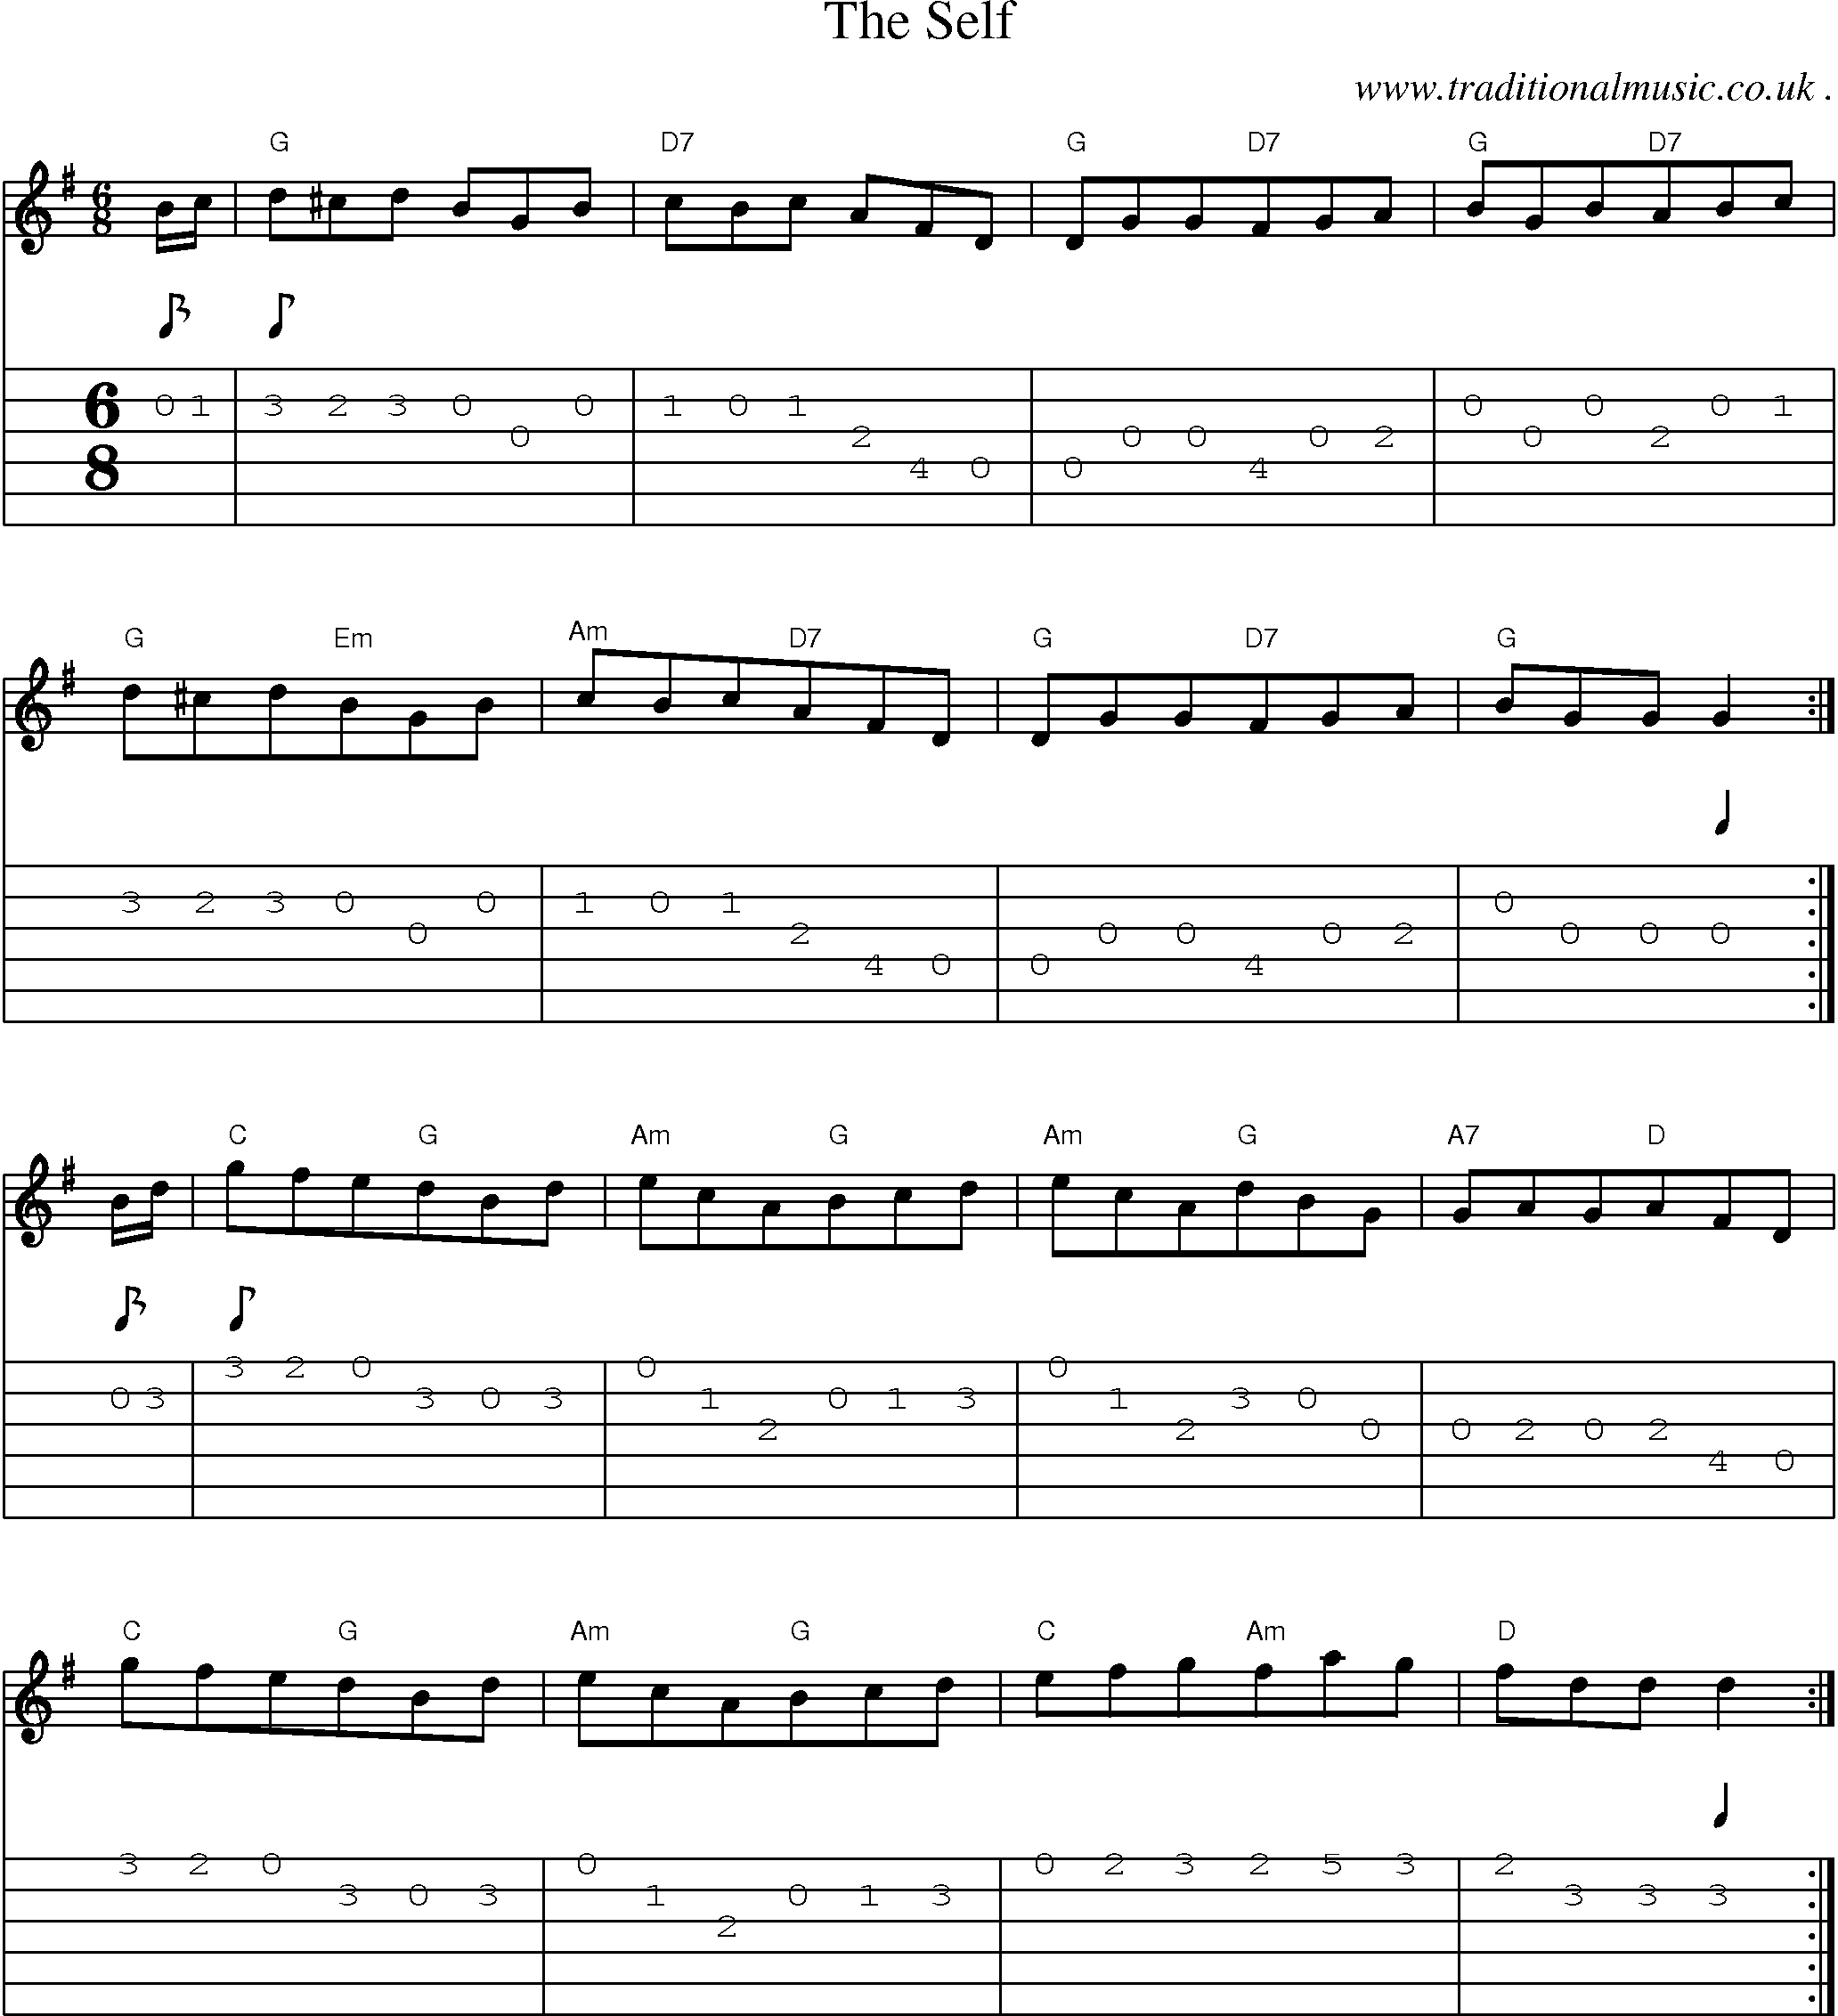 Sheet-Music and Guitar Tabs for The Self